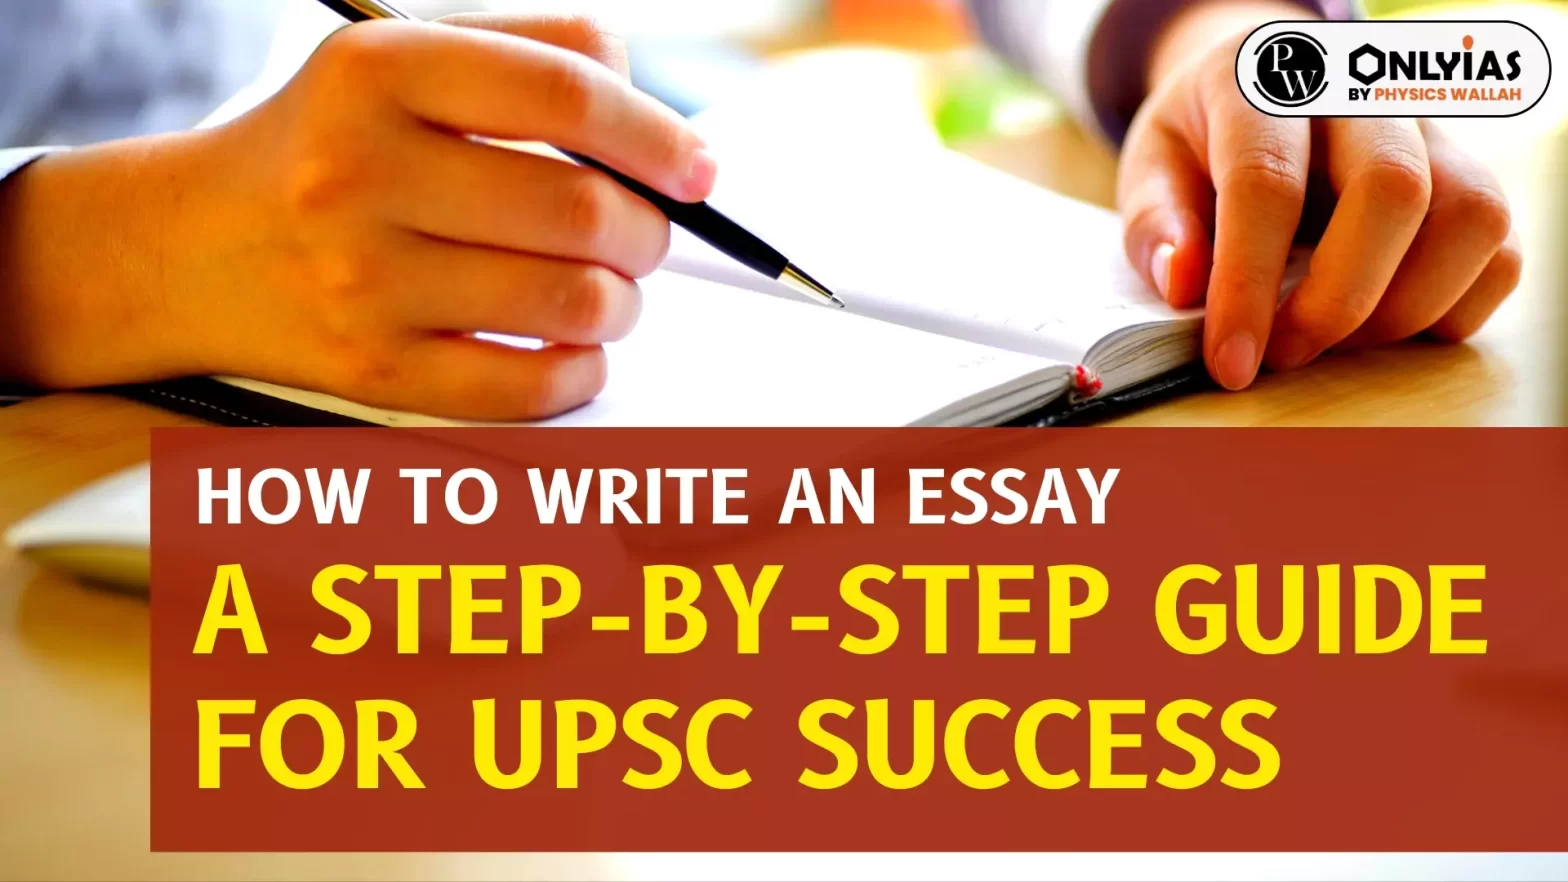 How to Write an Essay: A Step-by-Step Guide for UPSC Success